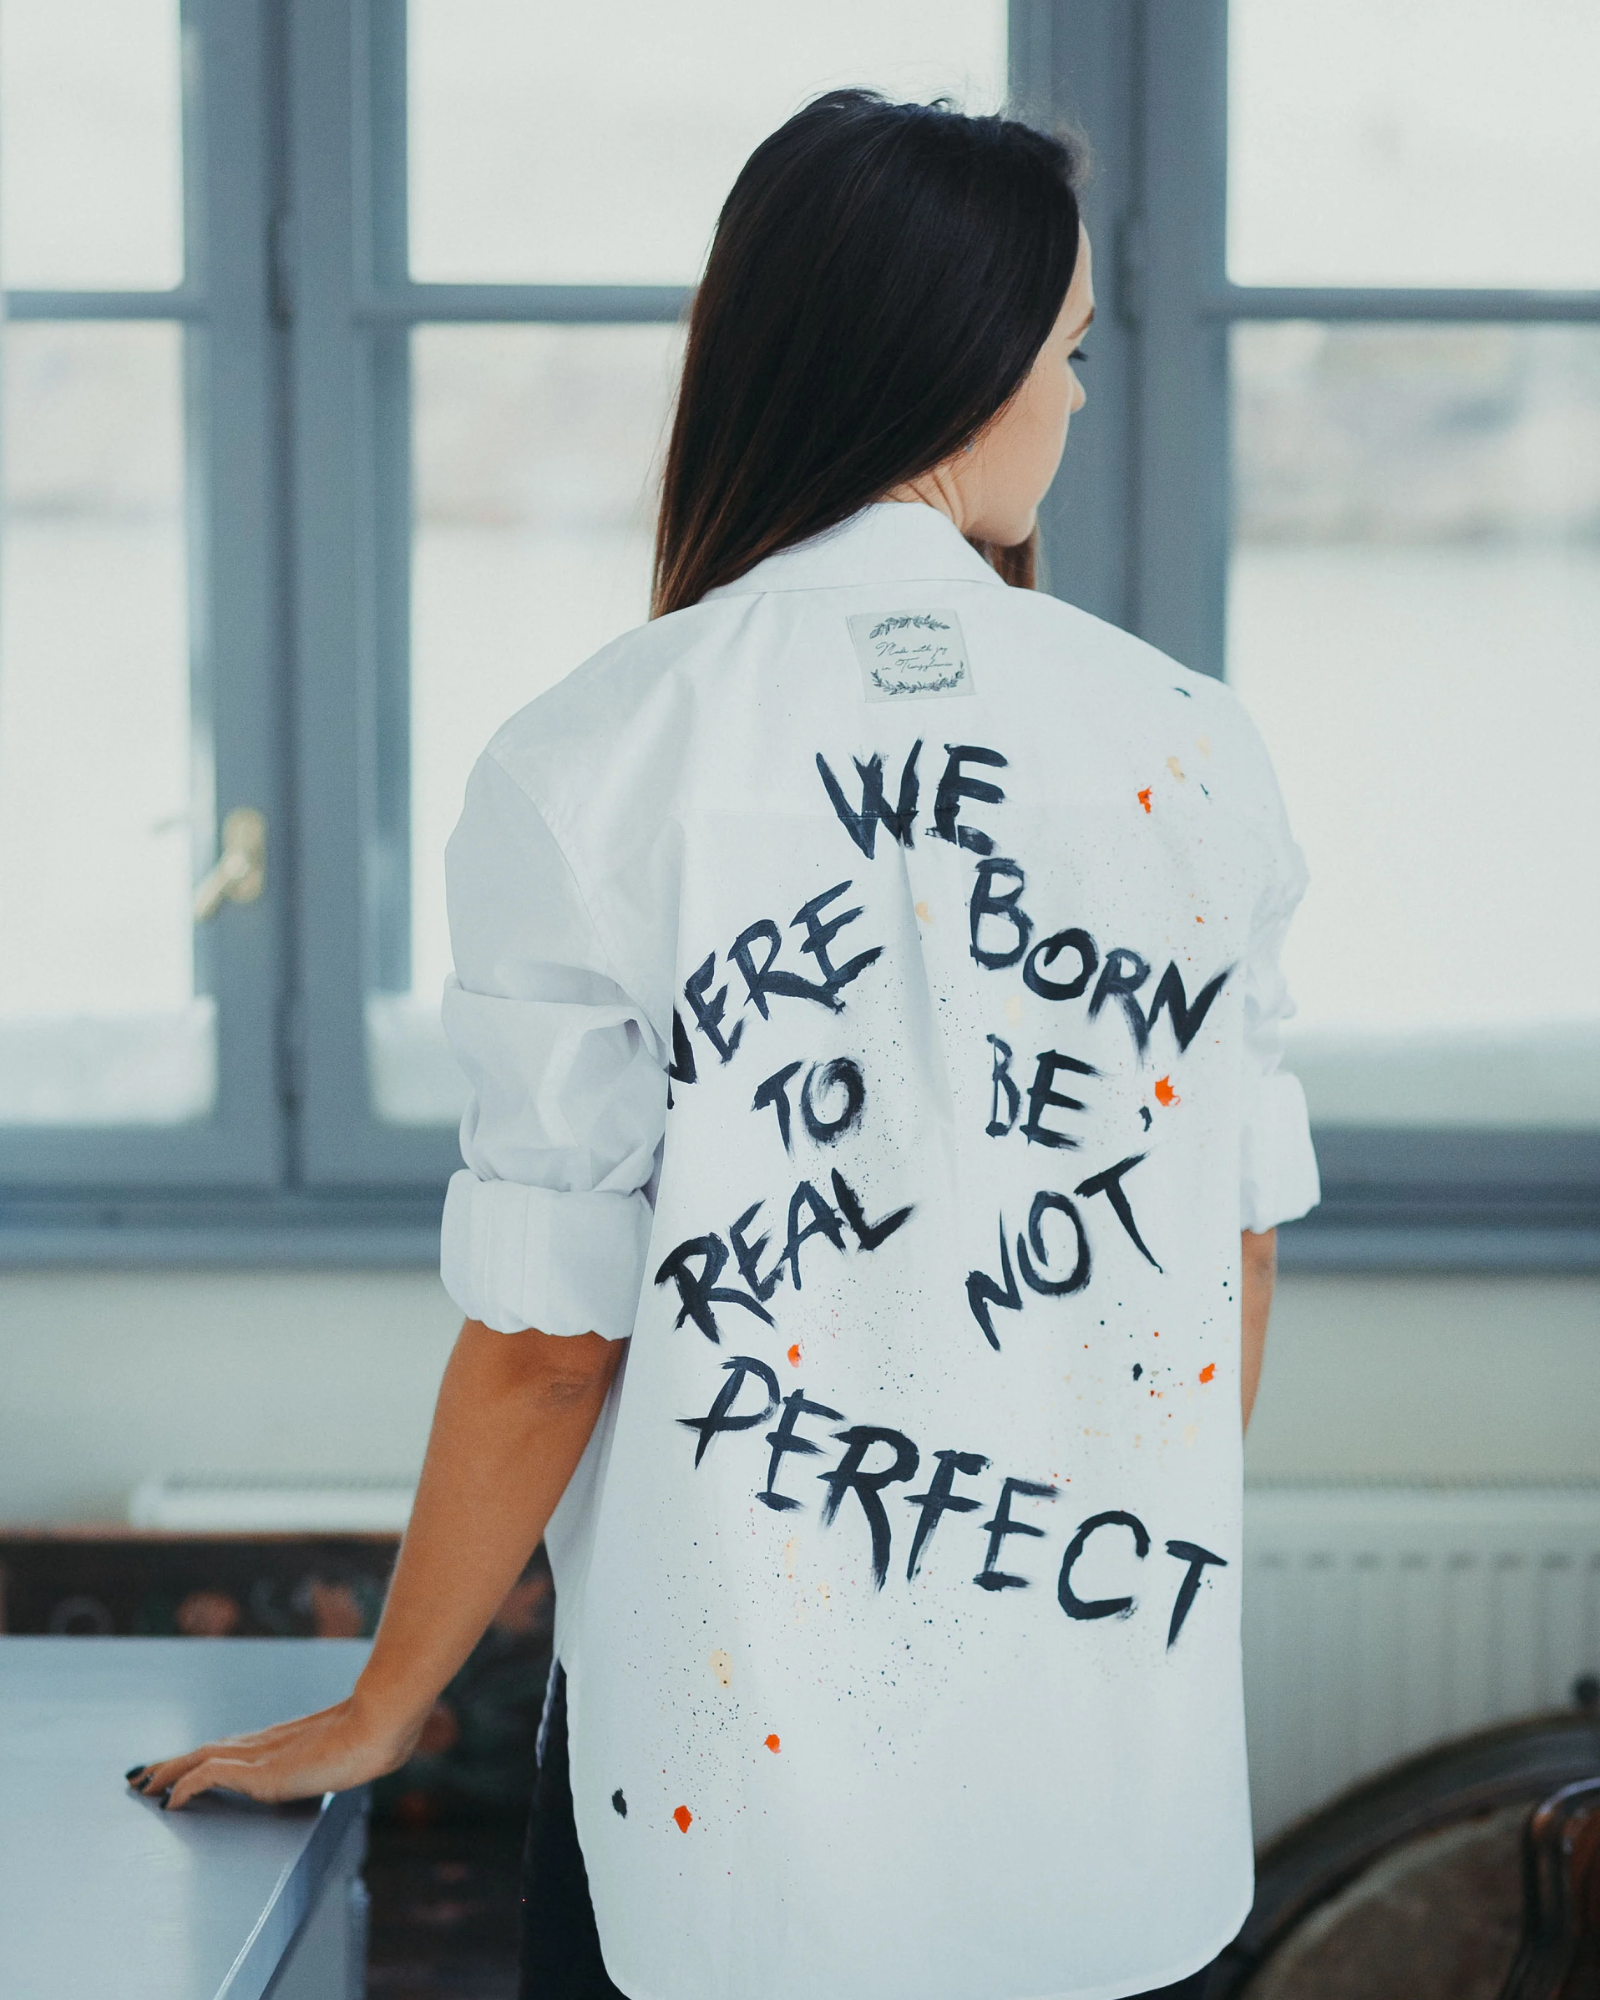 "We were born to be real" hand painted women's shirt